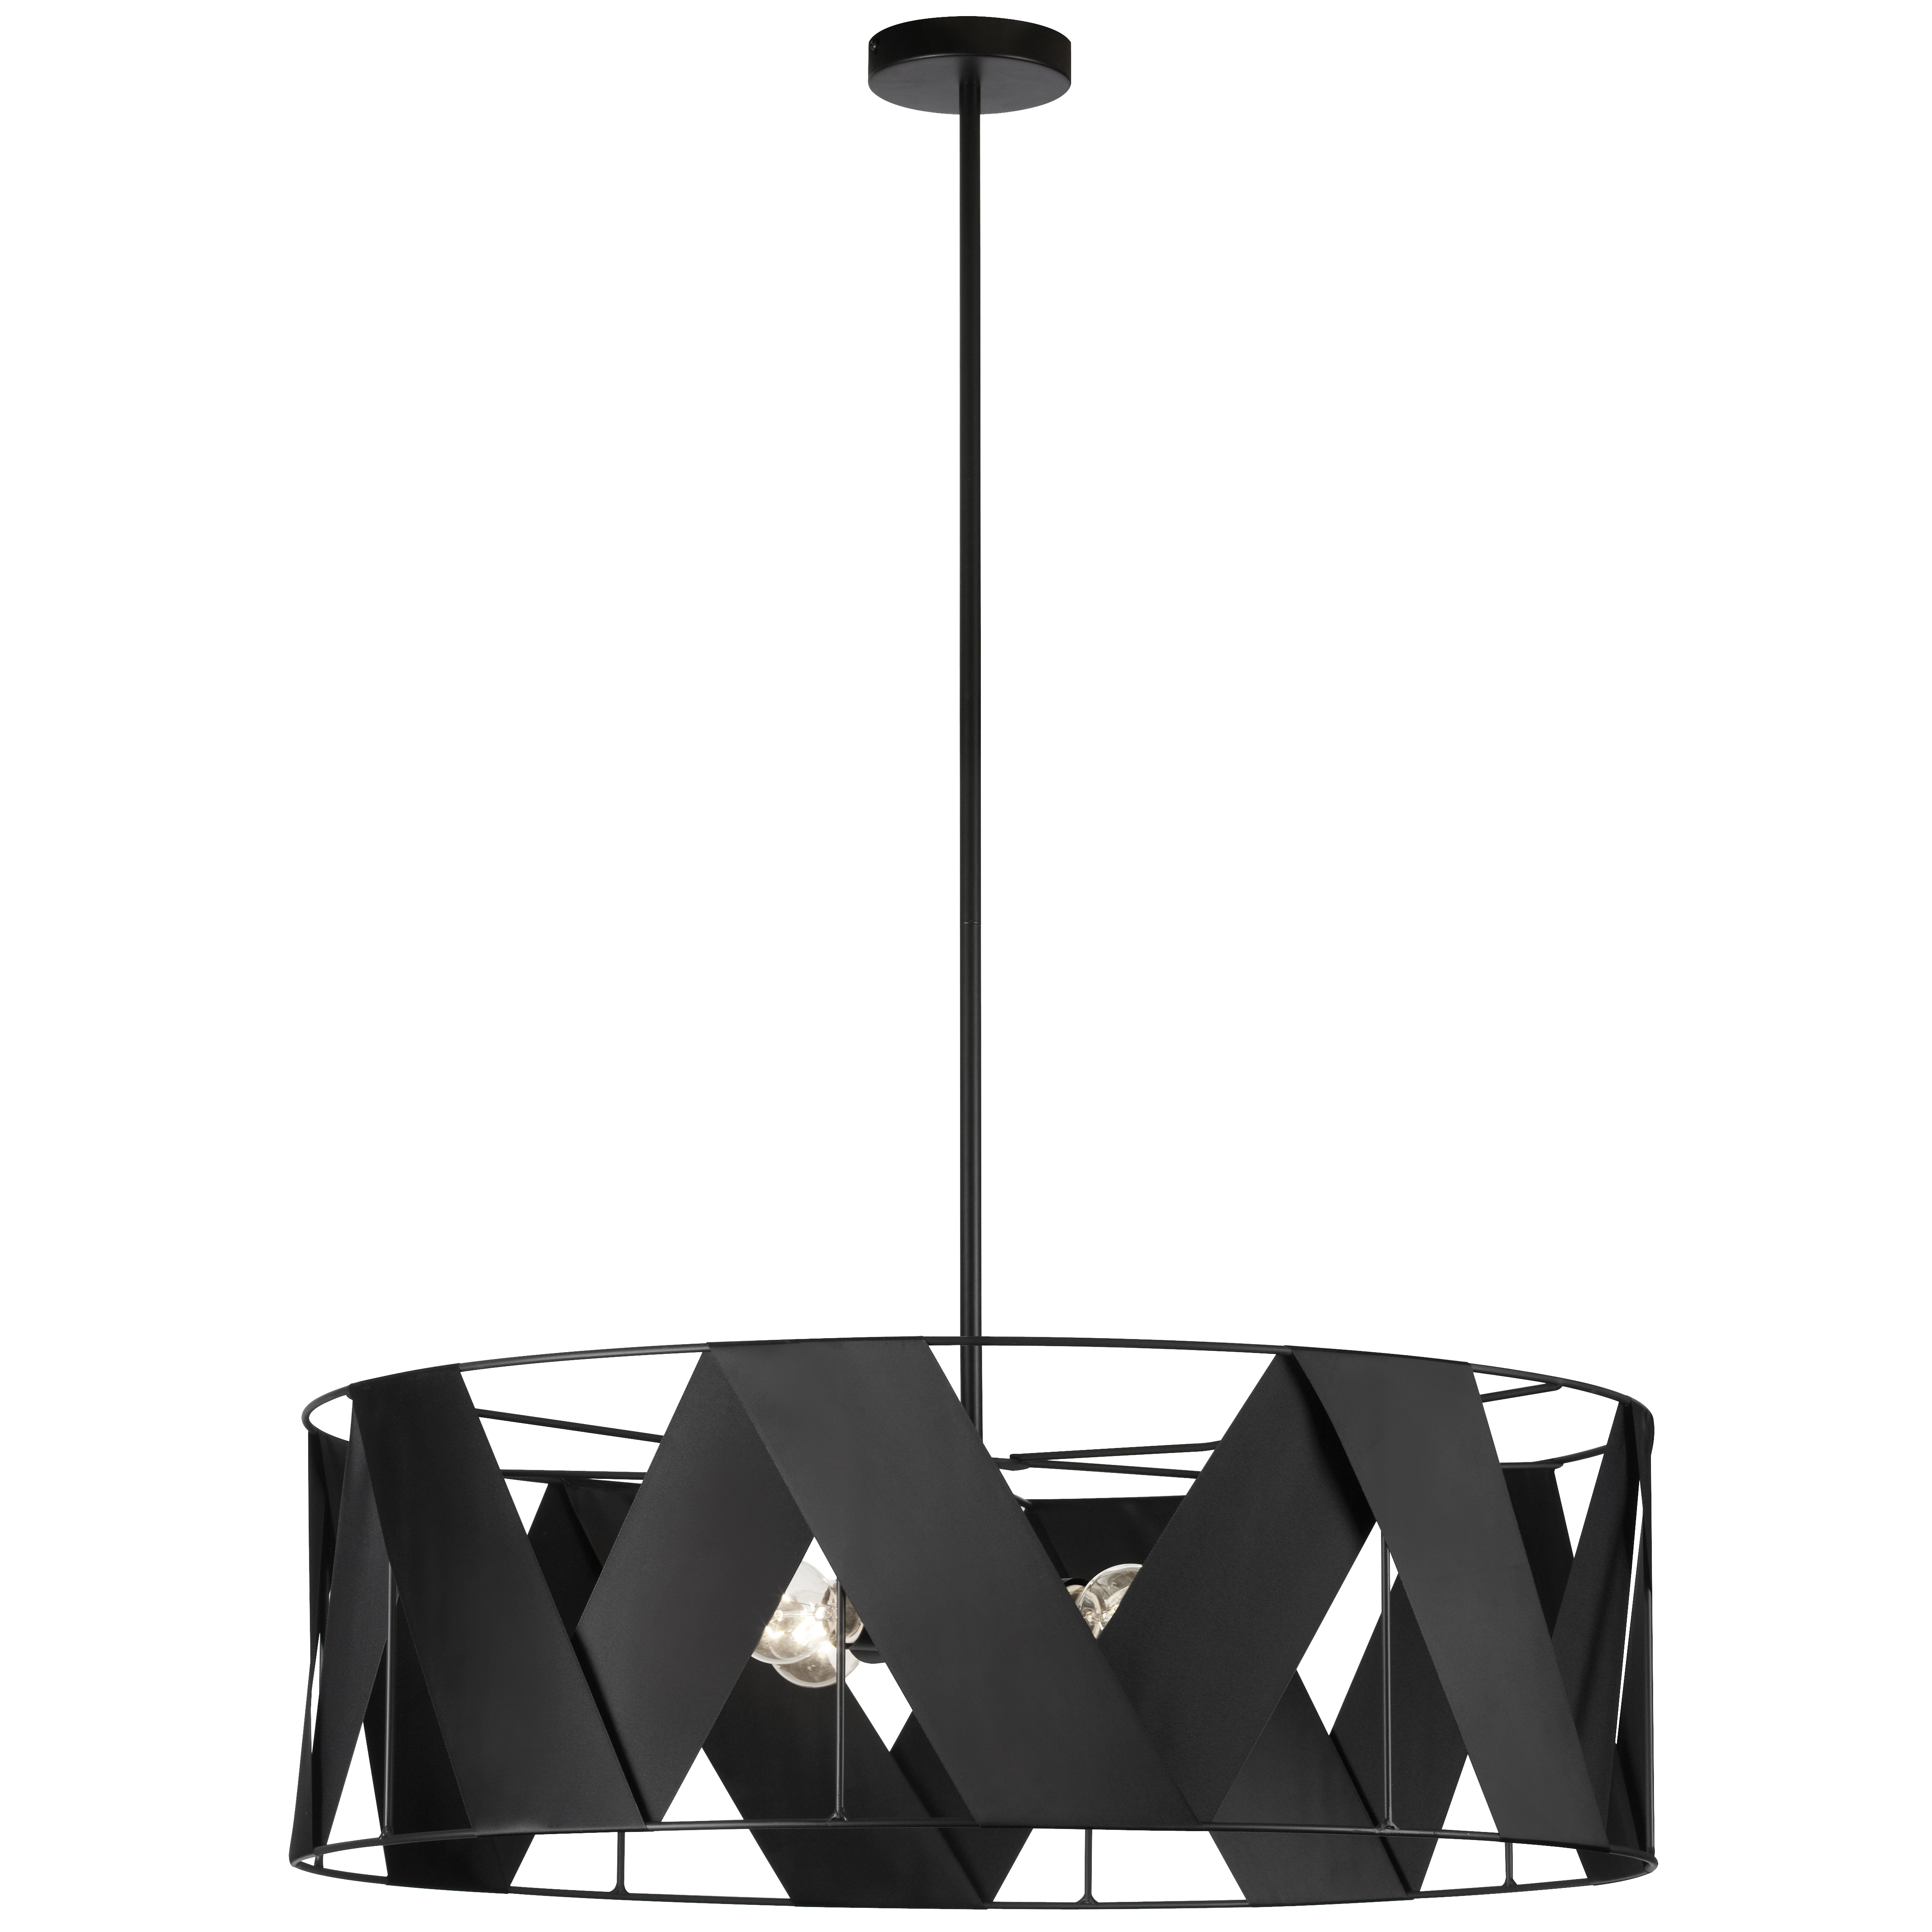 The Cardano family of lighting exudes a confident sense of style that will become a center of attention anywhere you place it. Combining elements of early to mid-century design with sleek modern flair and materials, it's a look that will enhance transitional or modern décors. A metal frame drops to hold a drum style shade with a ribbon mat in two different configurations, one open with a linear effect, the other woven into a solid, textural finish. The sophisticated attention to detail draws the eye. Cardano lighting can unify your home with singular panache, using the open design for kitchens and other areas where bright light is preferred, and the woven format for more subtle lighting.